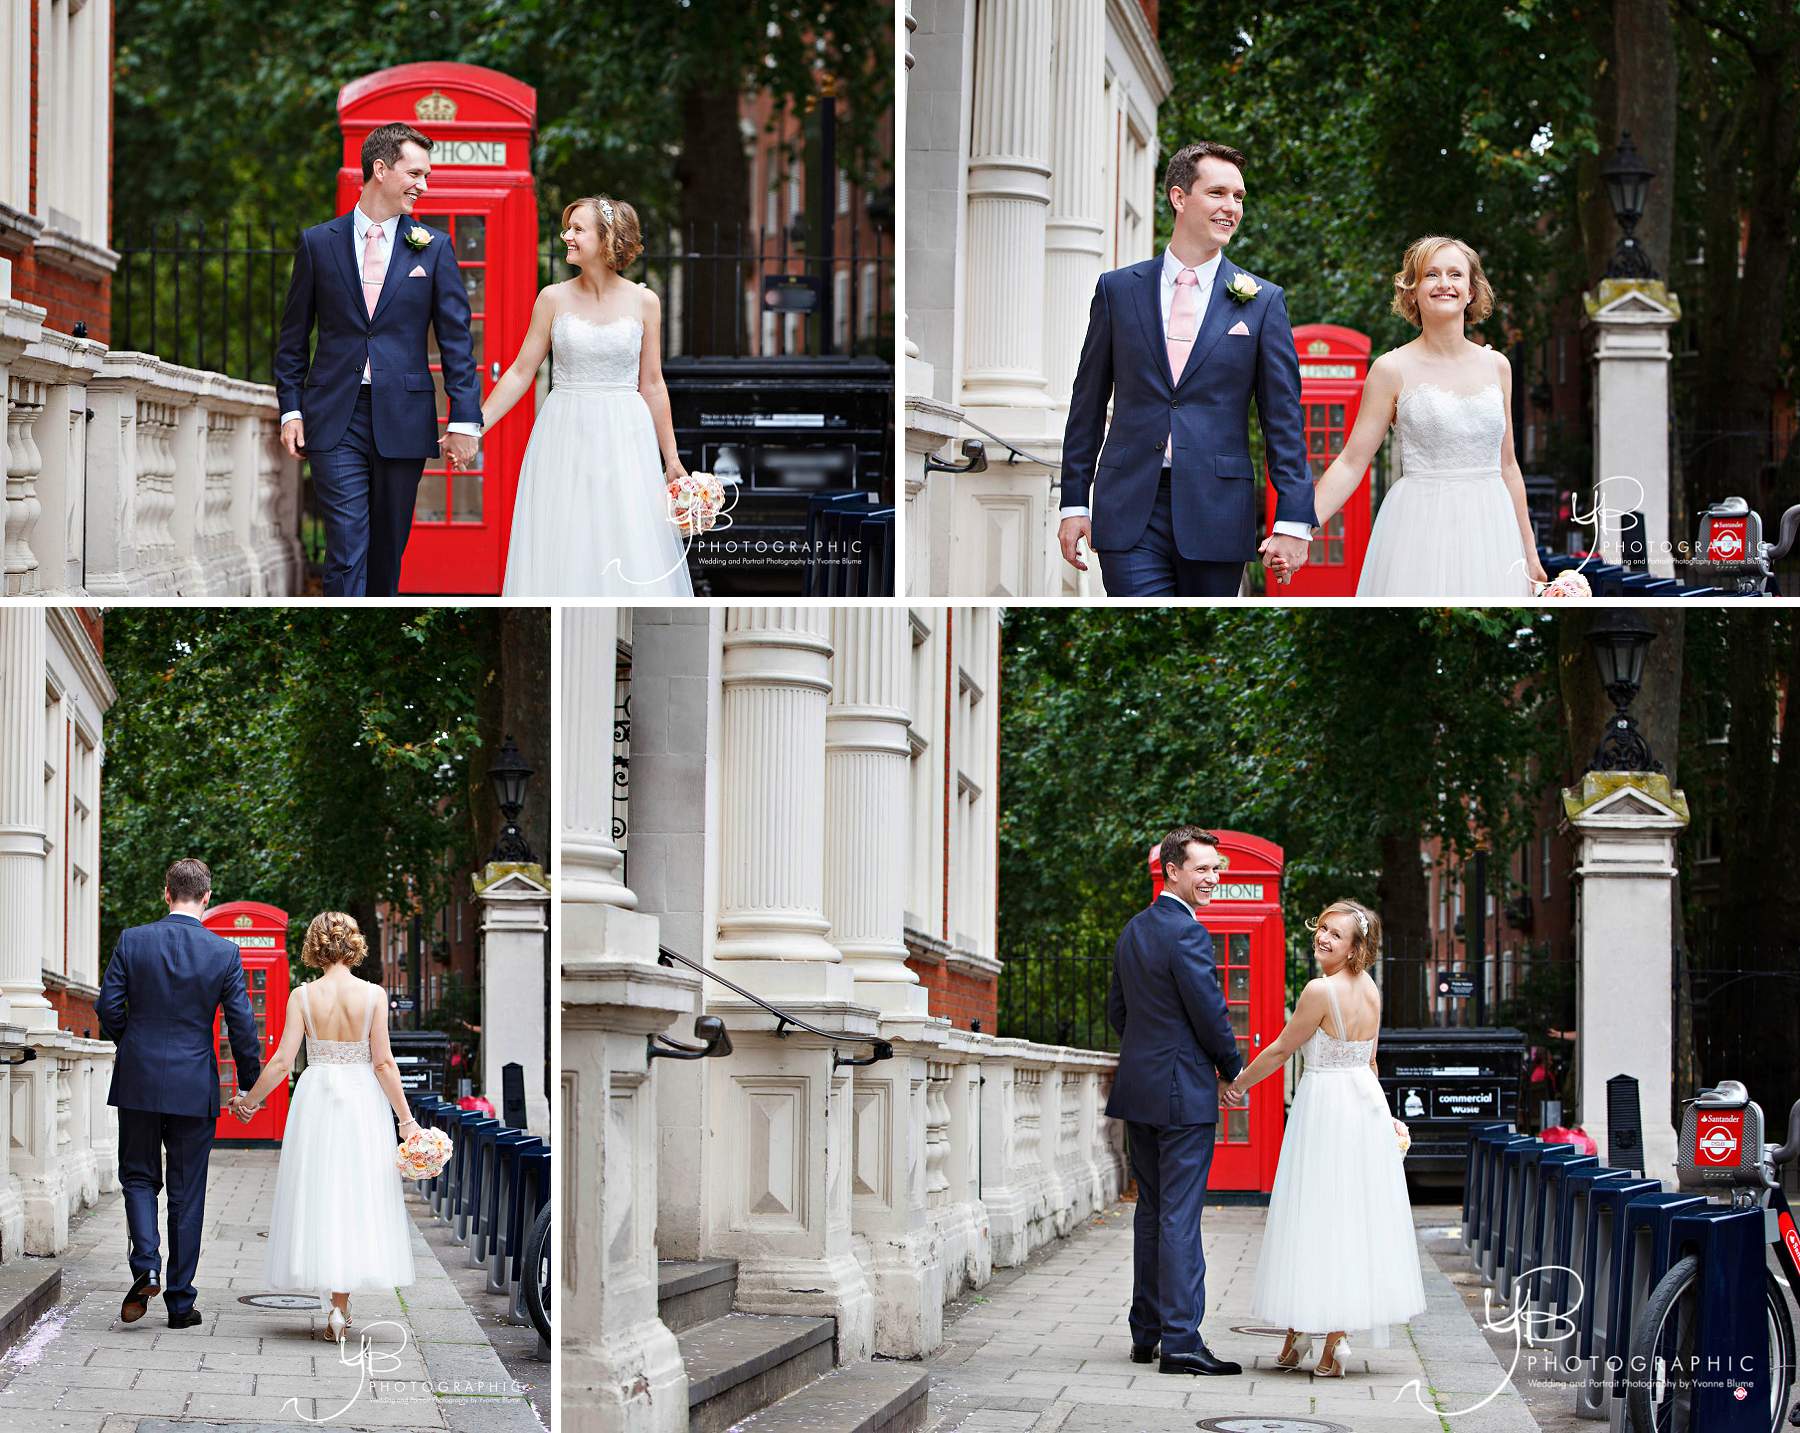 Bride and Groom portraits at Mayfair Library, featuring red London phonebox